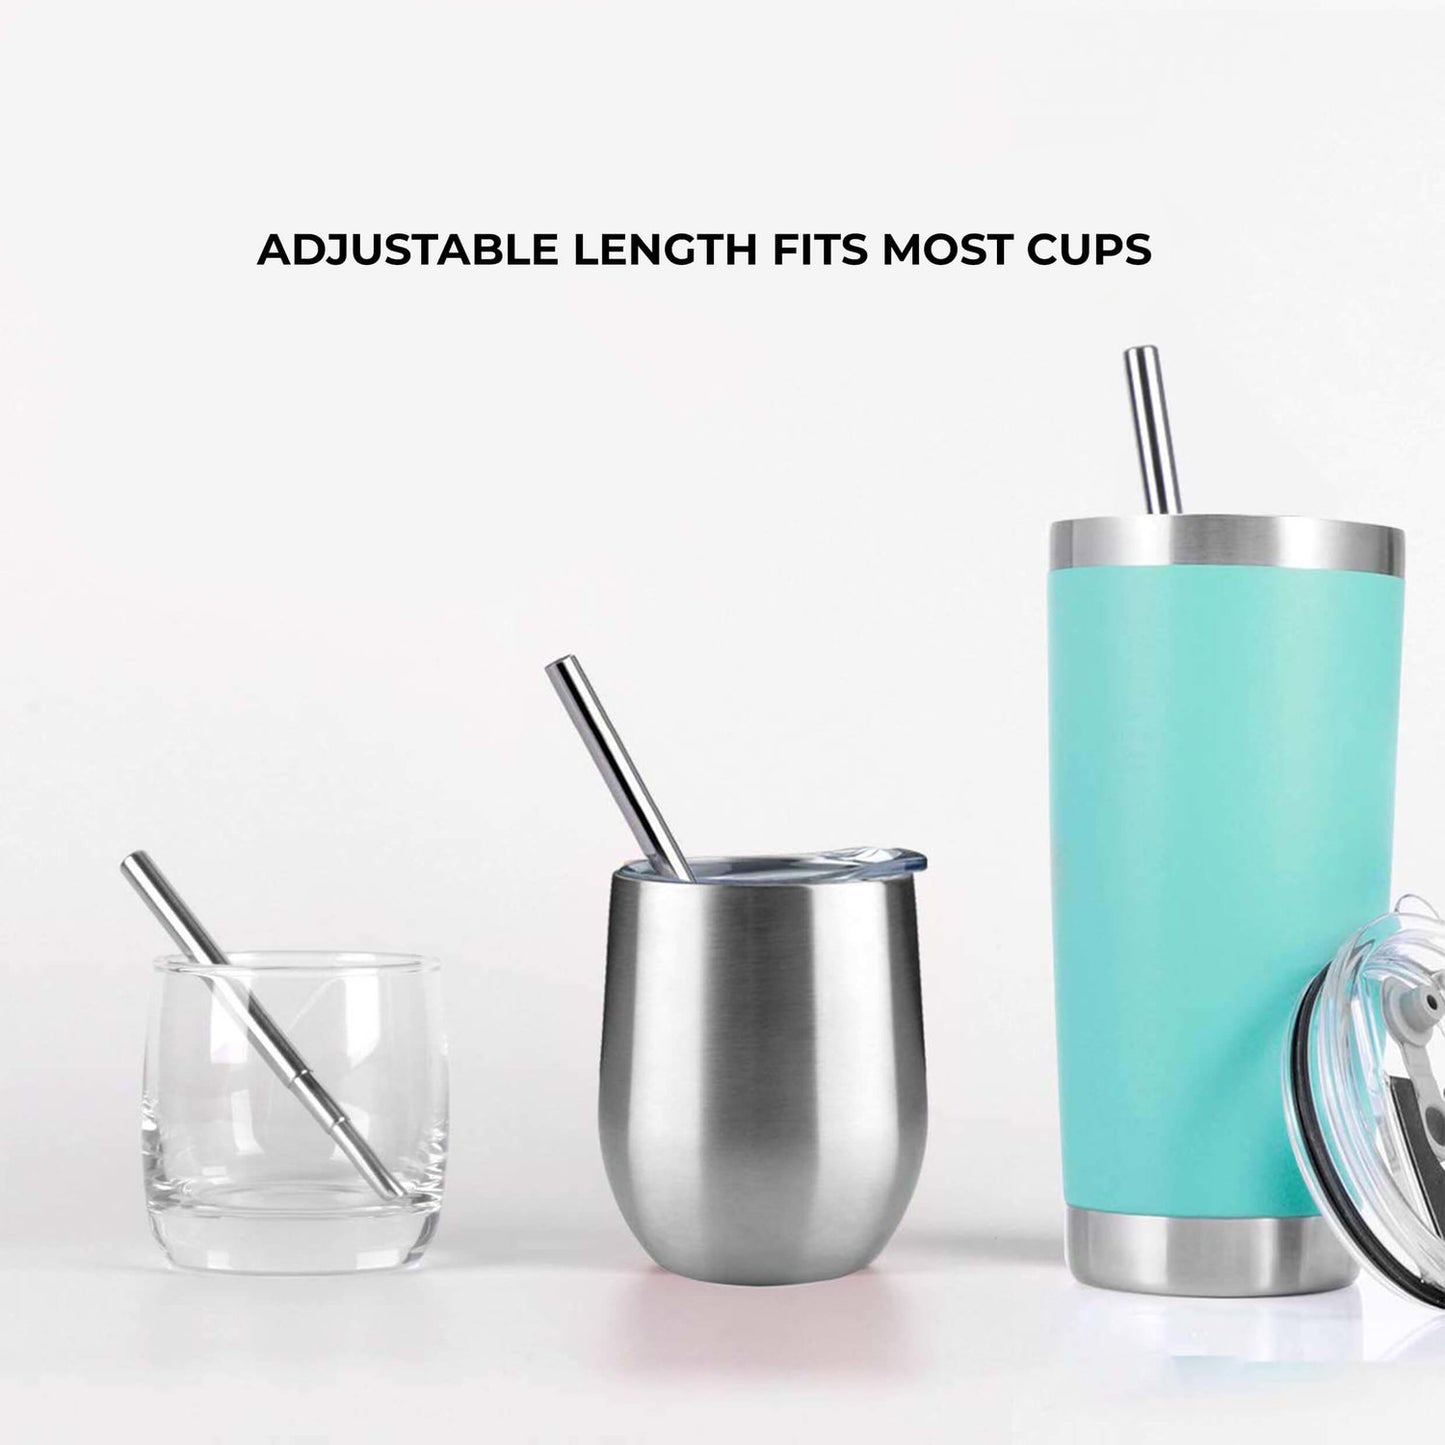 collapsible metal straw stainless steel with travel case